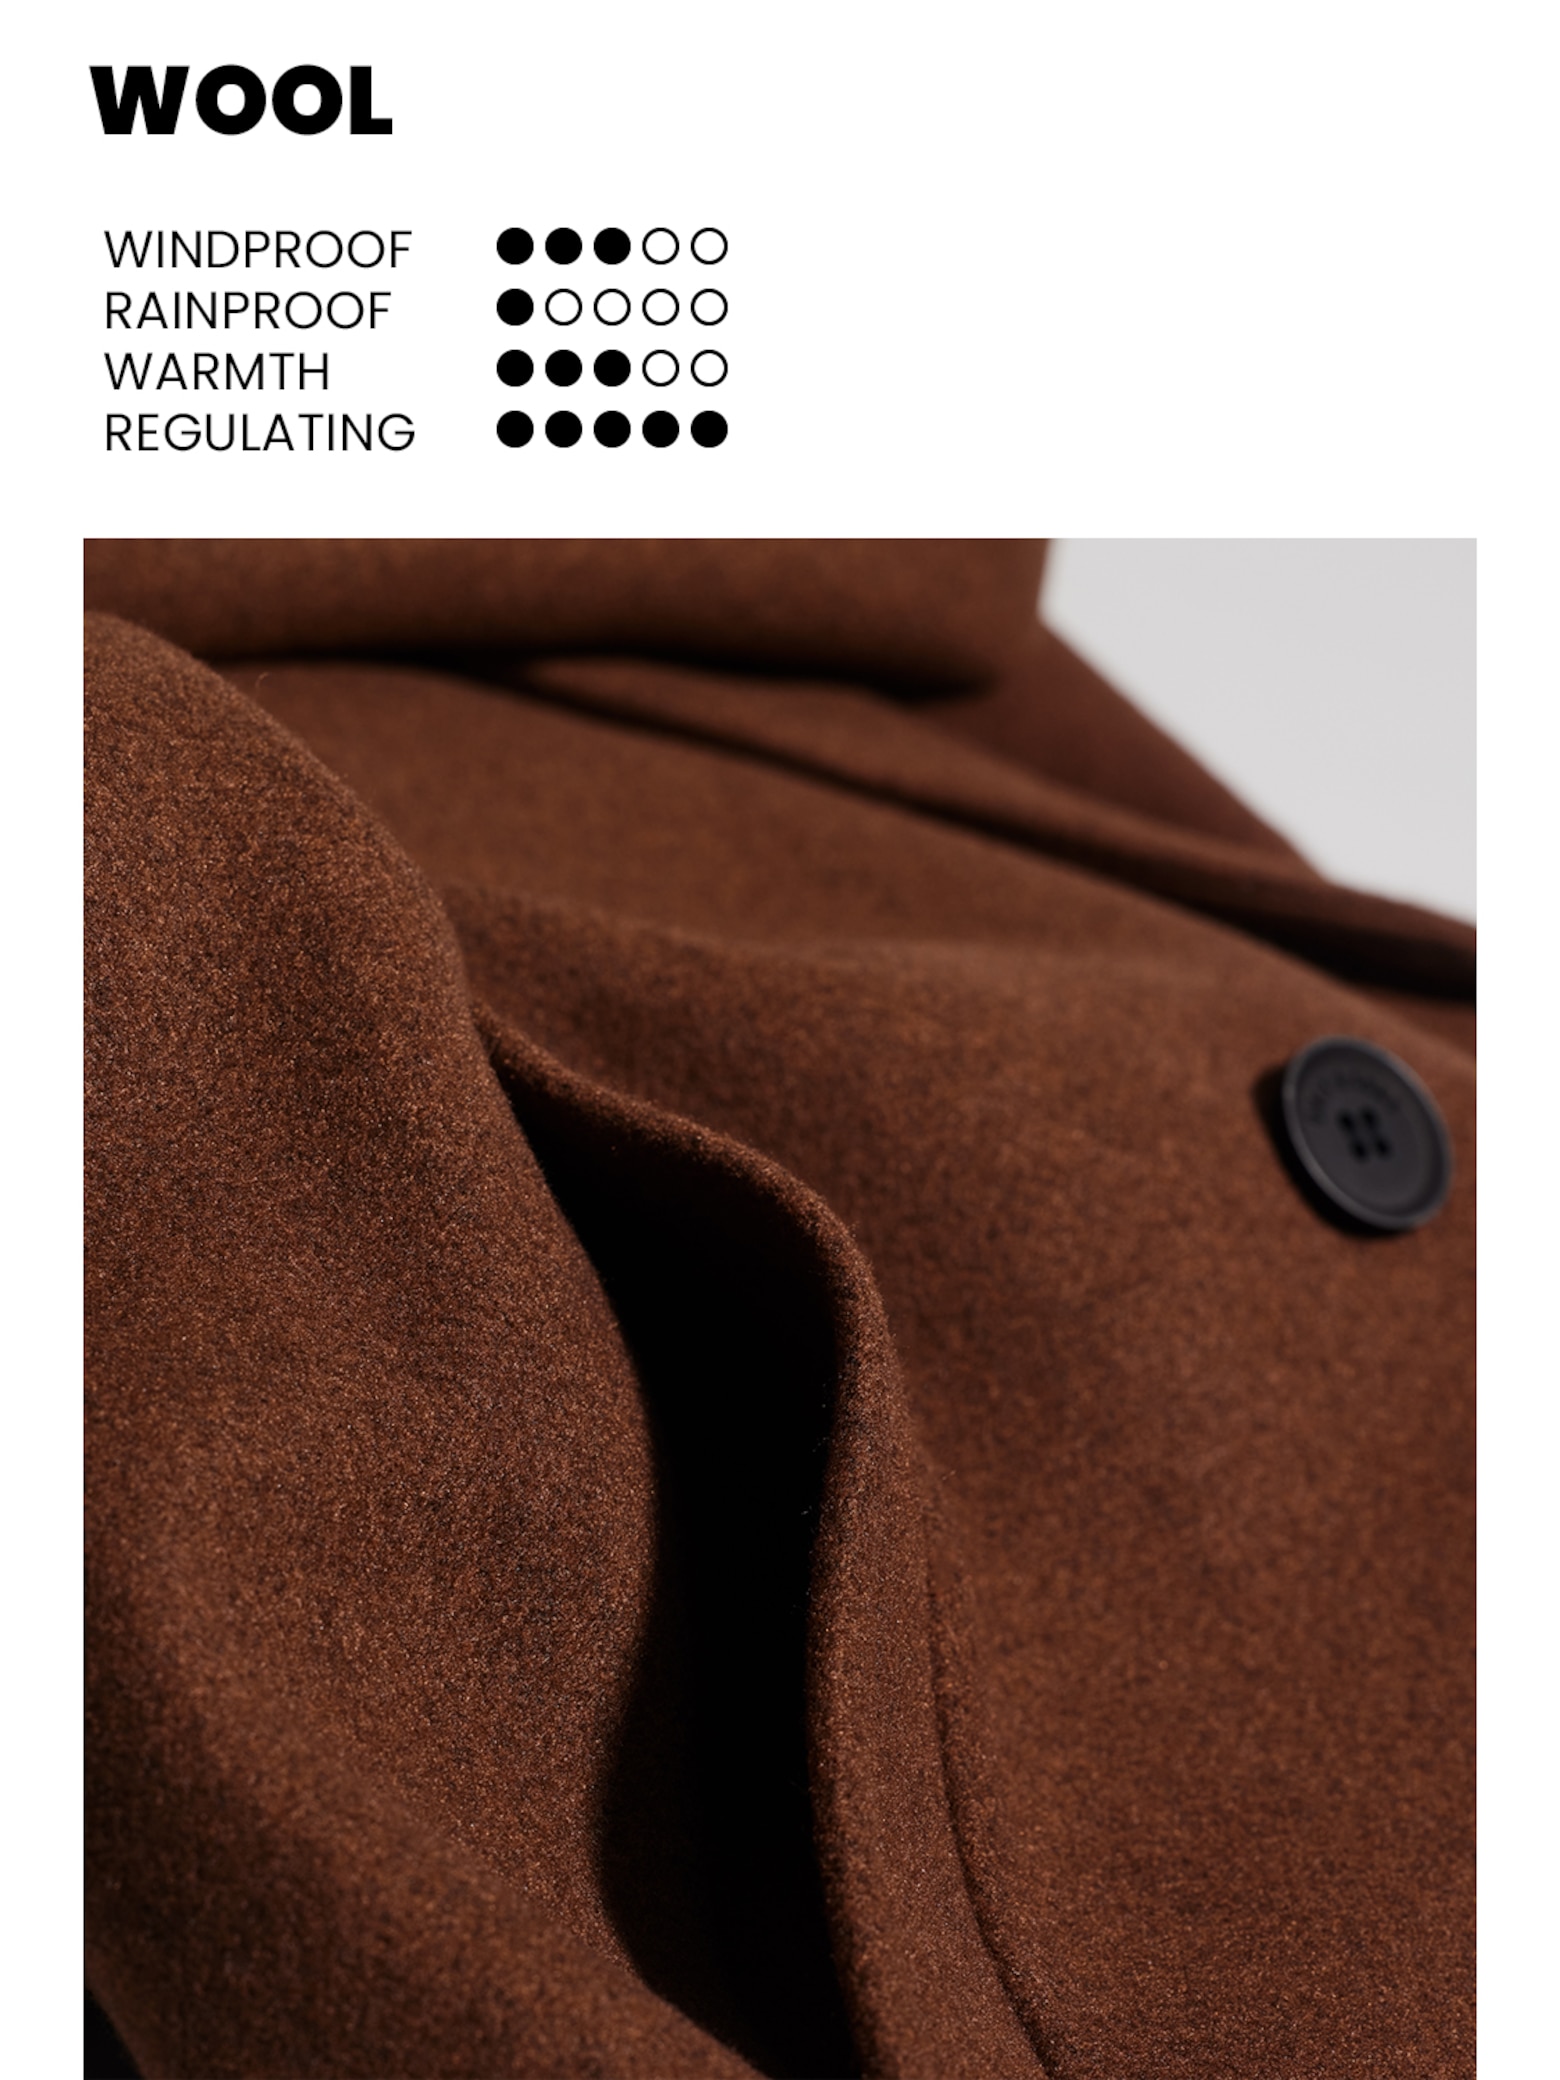 For jackets and coats A material guide